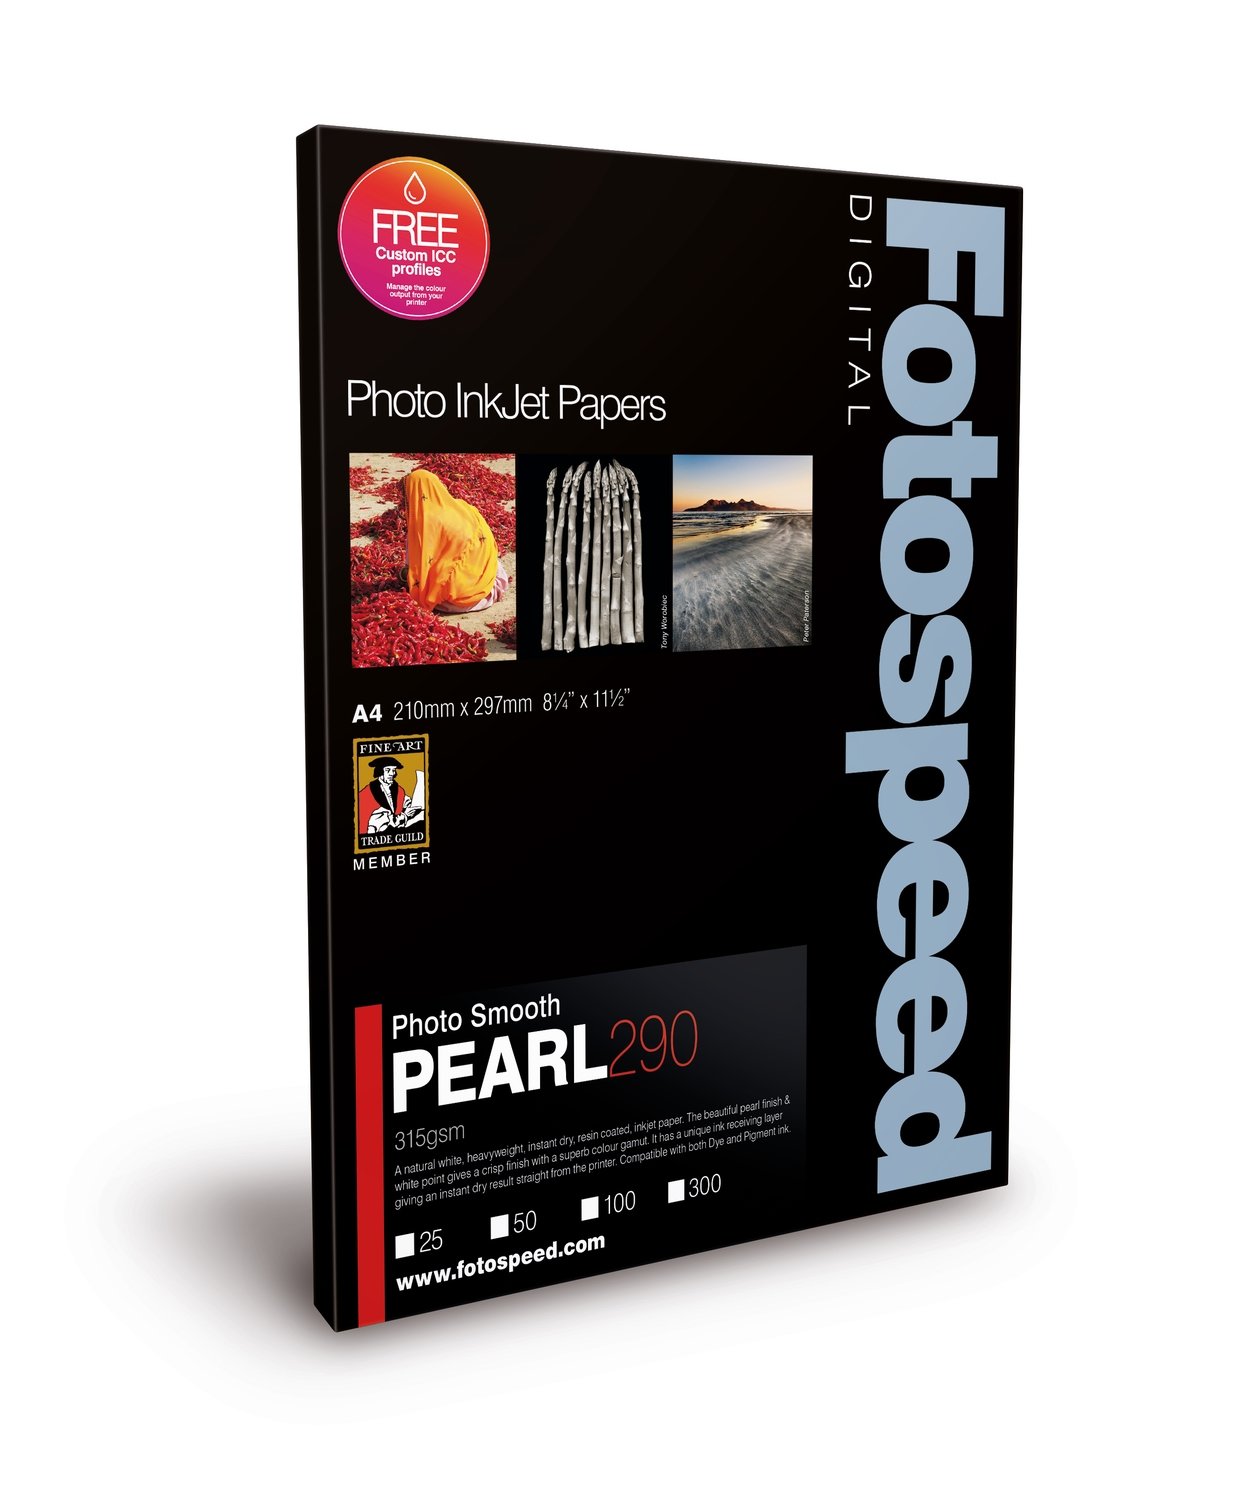 Fotospeed Photo Smooth Pearl 290 (A3, 50 sheets) - 7D592